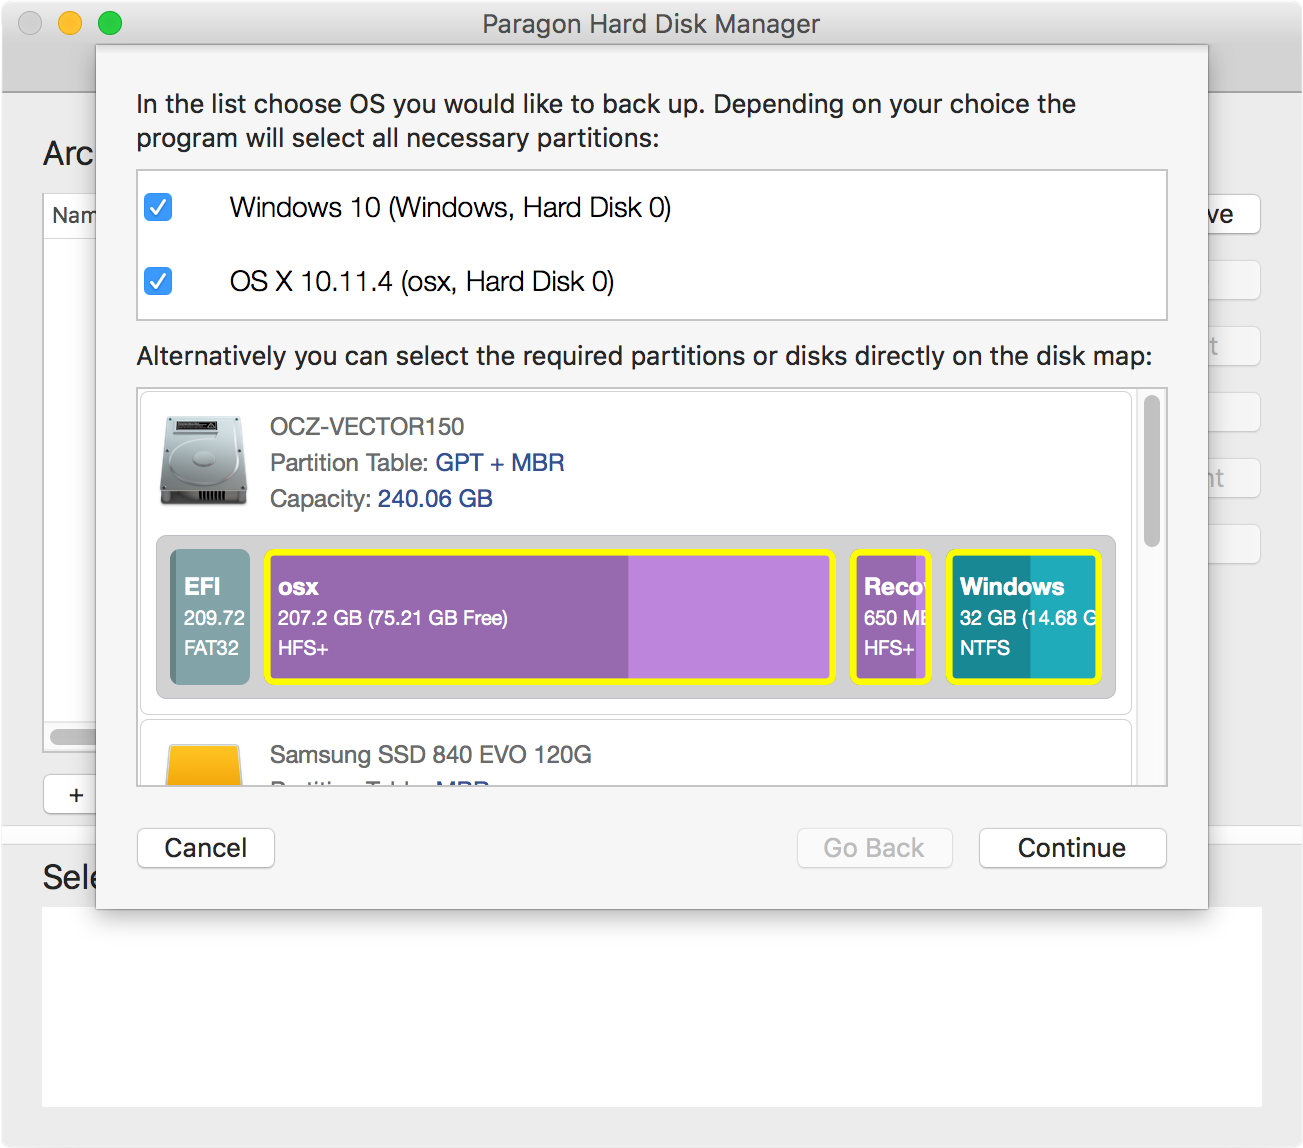 mac partition in windows